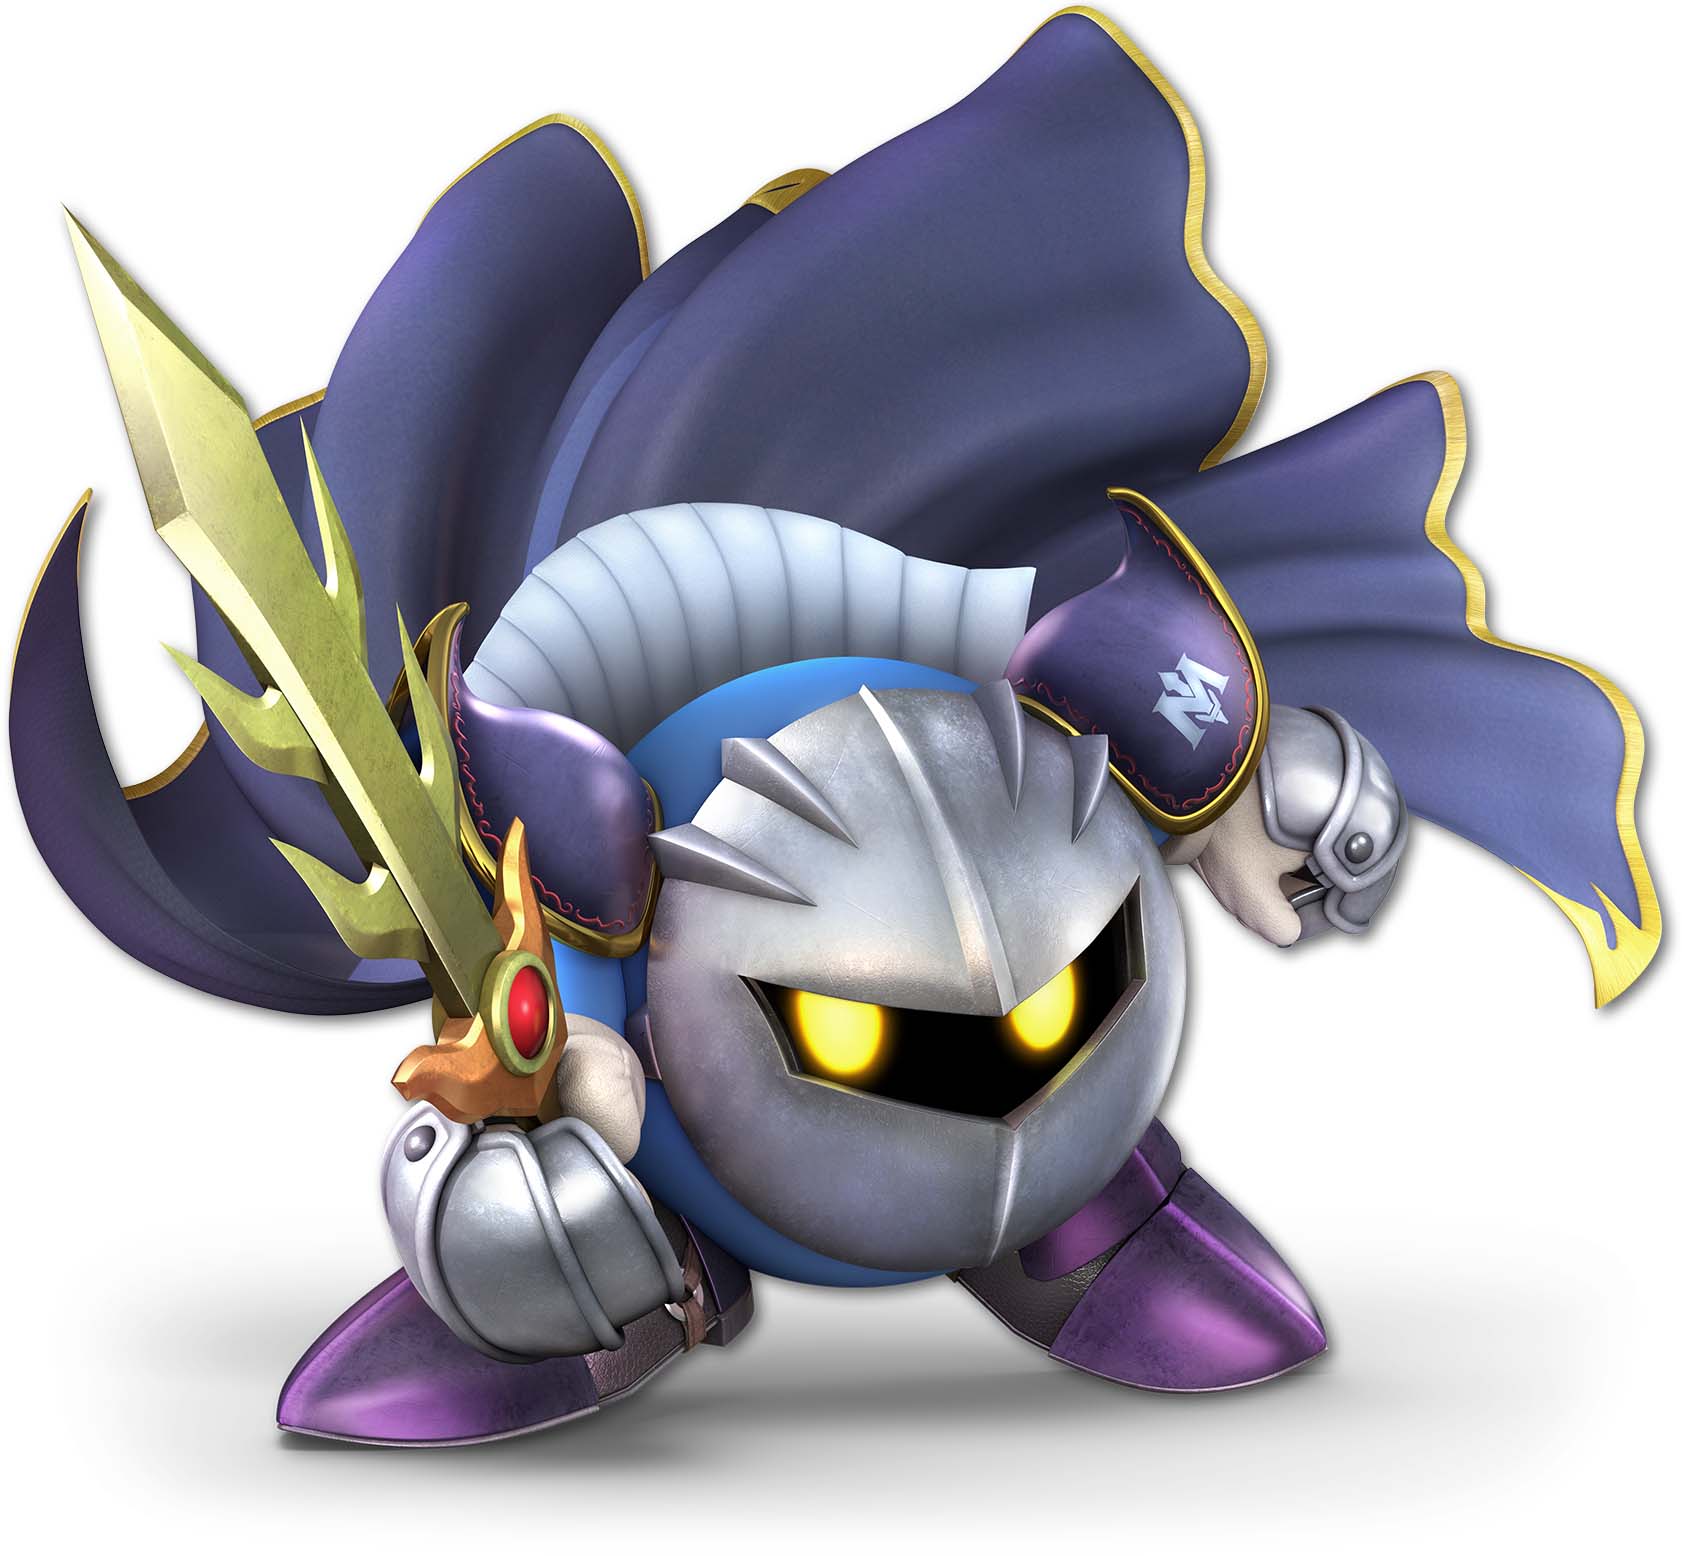 How to counter Meta Knight with Villager in Super Smash Bros. Ultimate